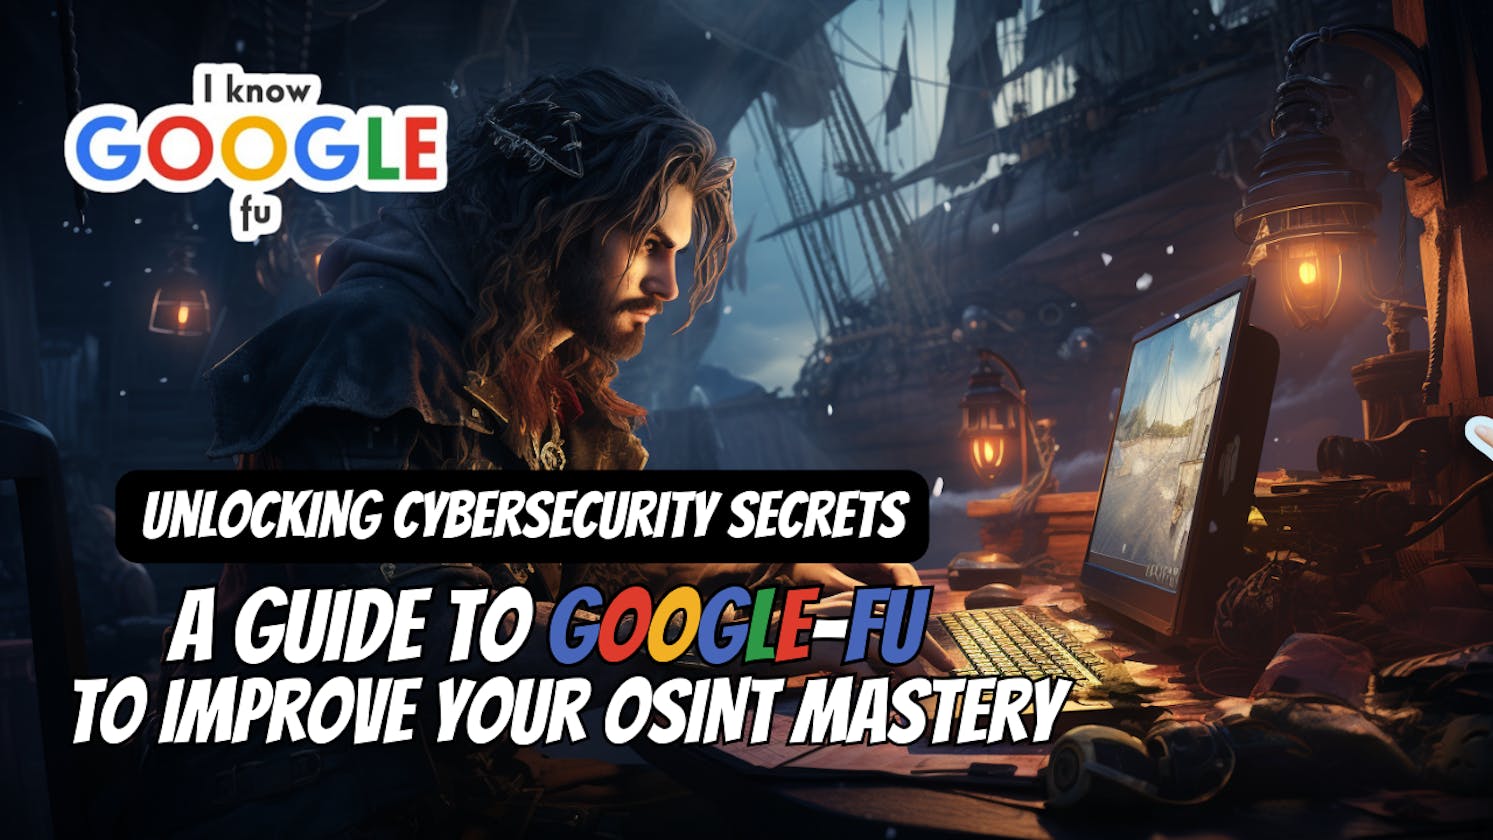 Unlocking Cybersecurity Secrets: A Guide to Google-fu to improve your OSINT Mastery